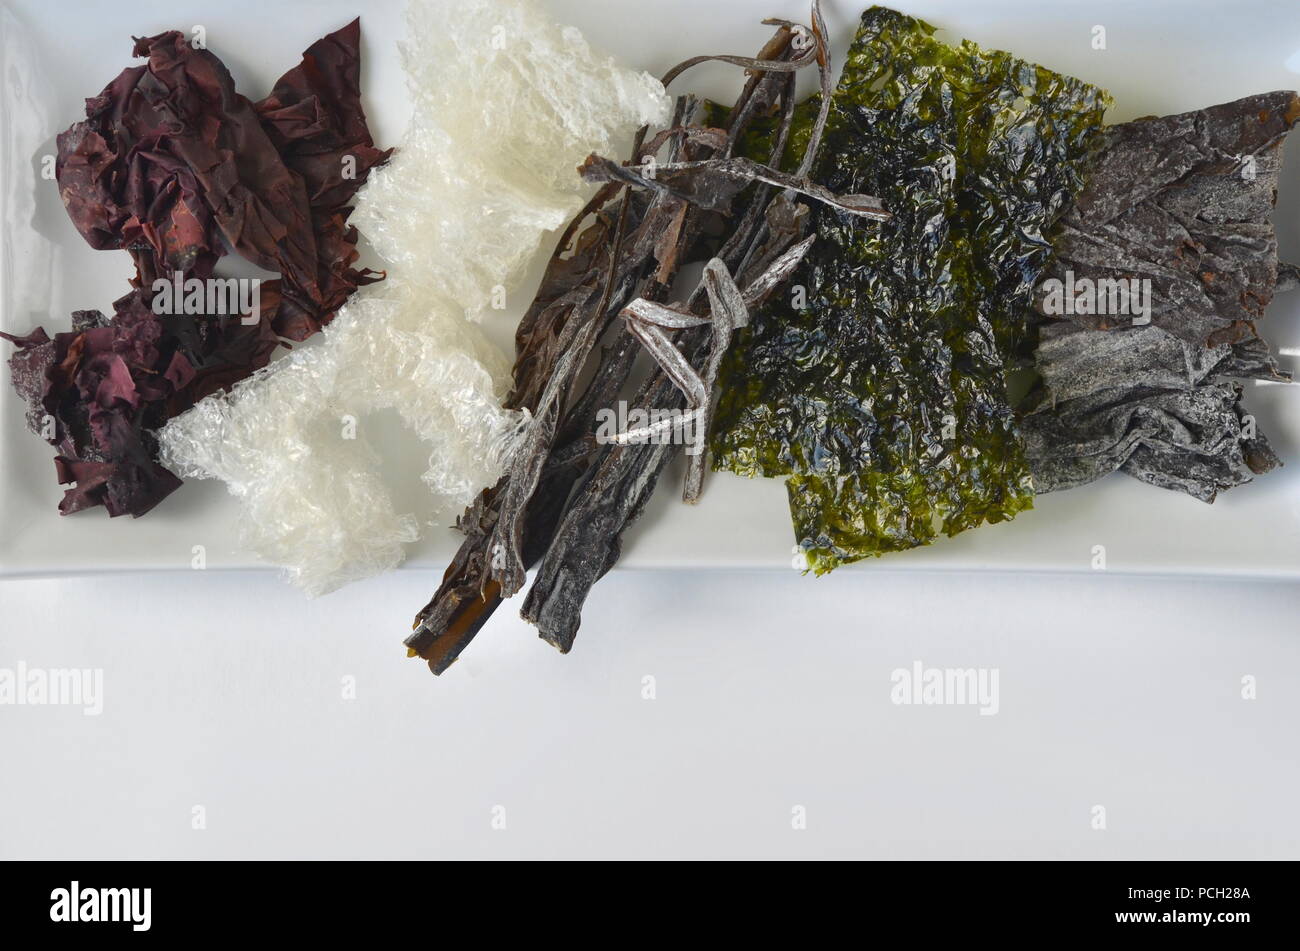 Detail top view of dried seaweed: nori, dulse, kelp, wakame, agar agar, alaria. Isolated on white.Nutrient rich vegan, raw and healthy sea vegetables. Stock Photo